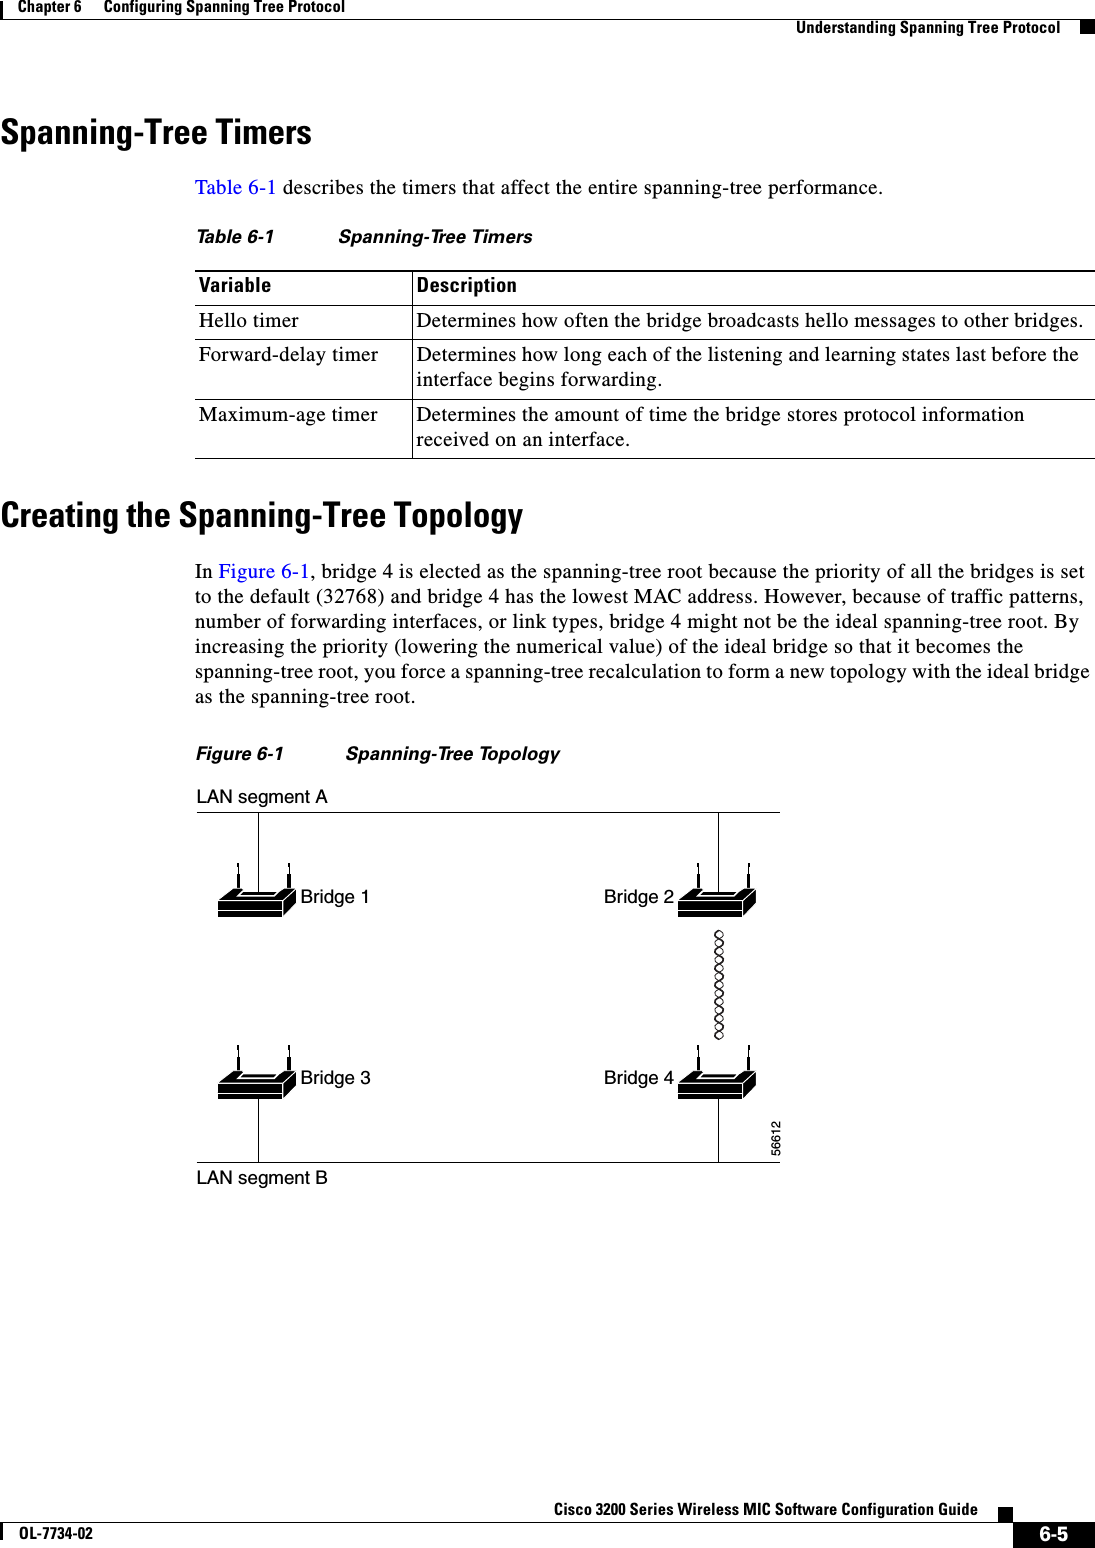 6-5Cisco 3200 Series Wireless MIC Software Configuration GuideOL-7734-02Chapter 6      Configuring Spanning Tree ProtocolUnderstanding Spanning Tree ProtocolSpanning-Tree TimersTable 6-1 describes the timers that affect the entire spanning-tree performance.Creating the Spanning-Tree TopologyIn Figure 6-1, bridge 4 is elected as the spanning-tree root because the priority of all the bridges is set to the default (32768) and bridge 4 has the lowest MAC address. However, because of traffic patterns, number of forwarding interfaces, or link types, bridge 4 might not be the ideal spanning-tree root. By increasing the priority (lowering the numerical value) of the ideal bridge so that it becomes the spanning-tree root, you force a spanning-tree recalculation to form a new topology with the ideal bridge as the spanning-tree root.Figure 6-1 Spanning-Tree TopologyTable 6-1 Spanning-Tree TimersVariable DescriptionHello timer Determines how often the bridge broadcasts hello messages to other bridges.Forward-delay timer Determines how long each of the listening and learning states last before the interface begins forwarding.Maximum-age timer Determines the amount of time the bridge stores protocol information received on an interface.LAN segment ALAN segment BBridge 1Bridge 3Bridge 2Bridge 456612